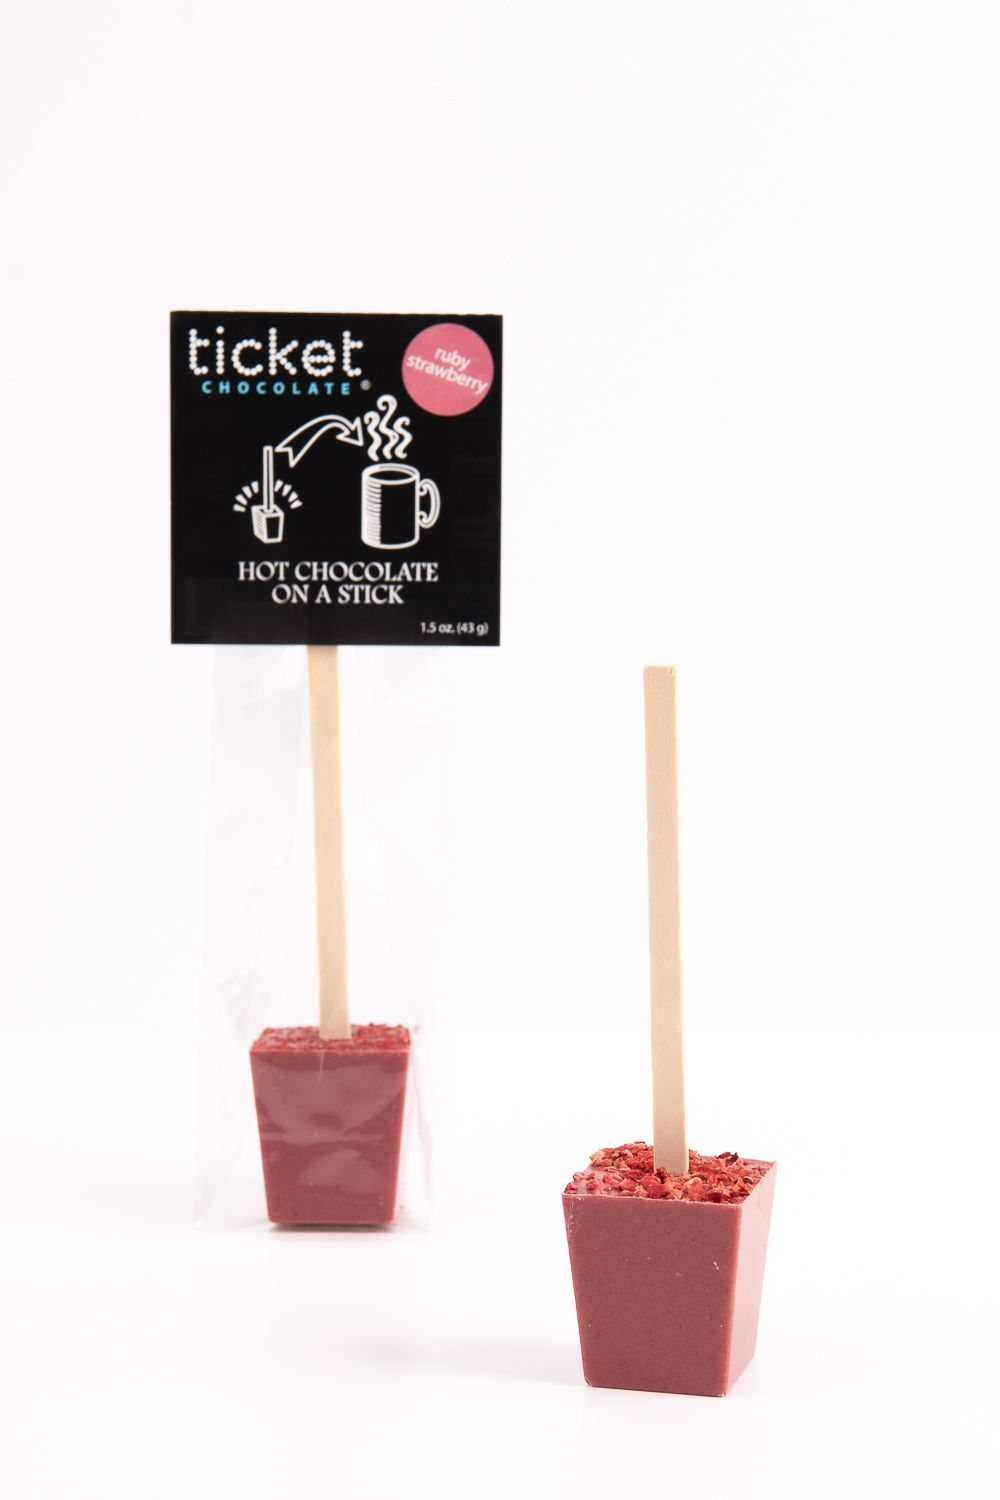 Artisan Chocolate | Gourmet Chocolate | Boutique Chocolate | Belgian Chocolate | Wholesale Chocolate | Hot Chocolate on a Stick | Ruby Strawberry | Ticket Chocolate | Gift